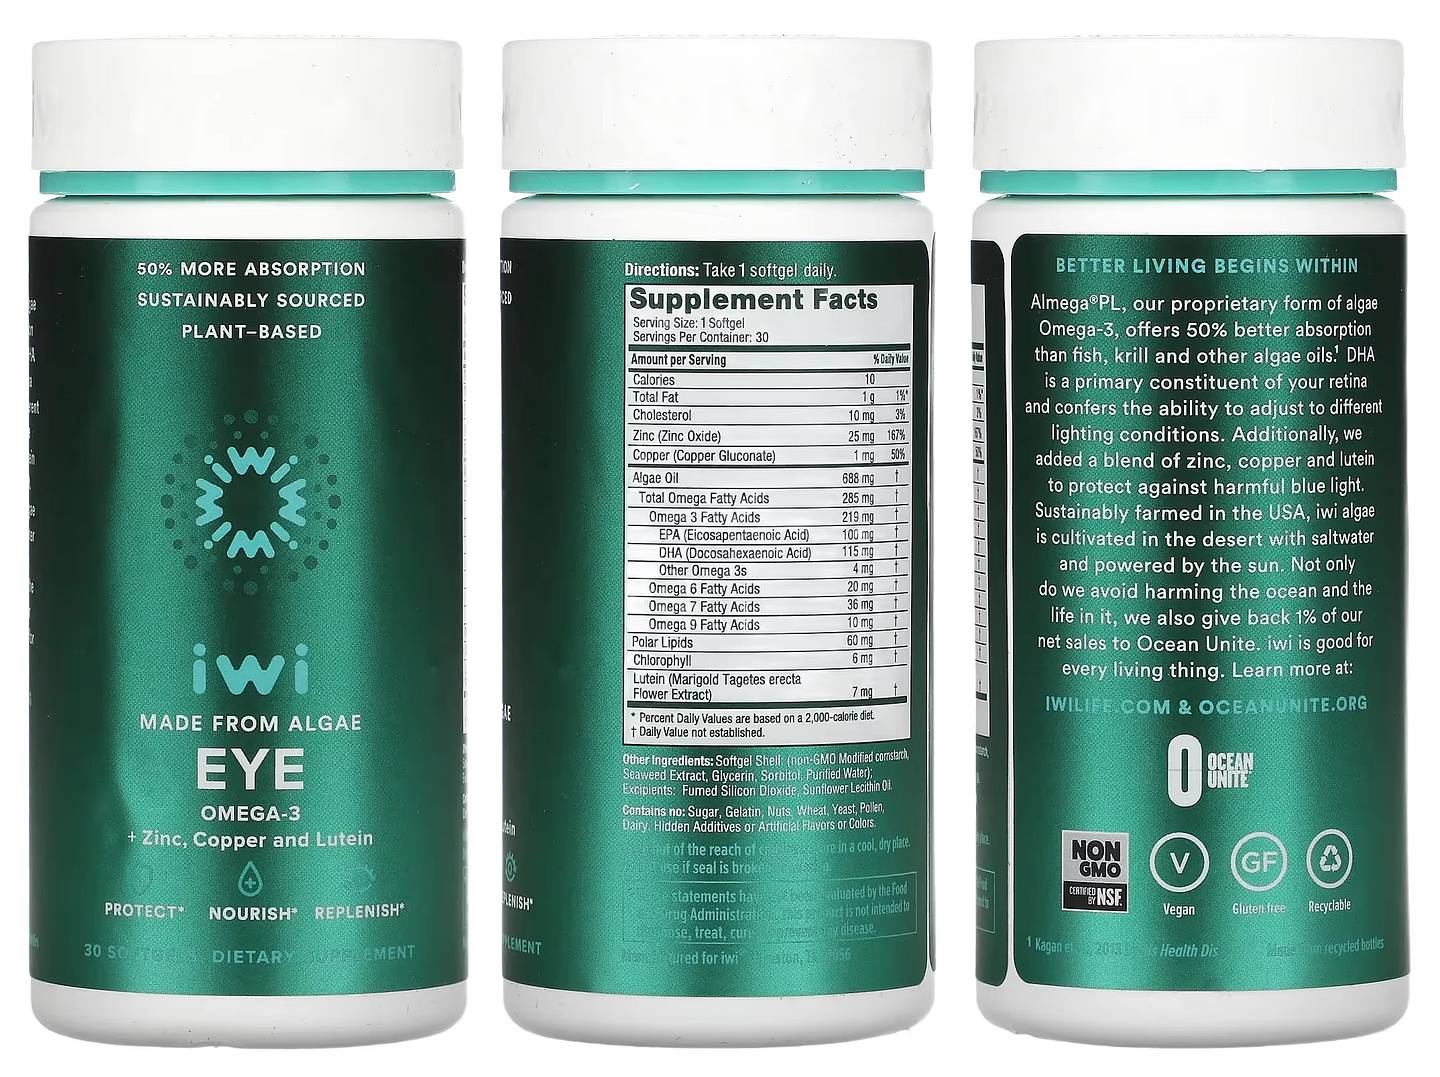 iWi, Eye, Omega-3 + Zinc, Copper and Lutein packaging